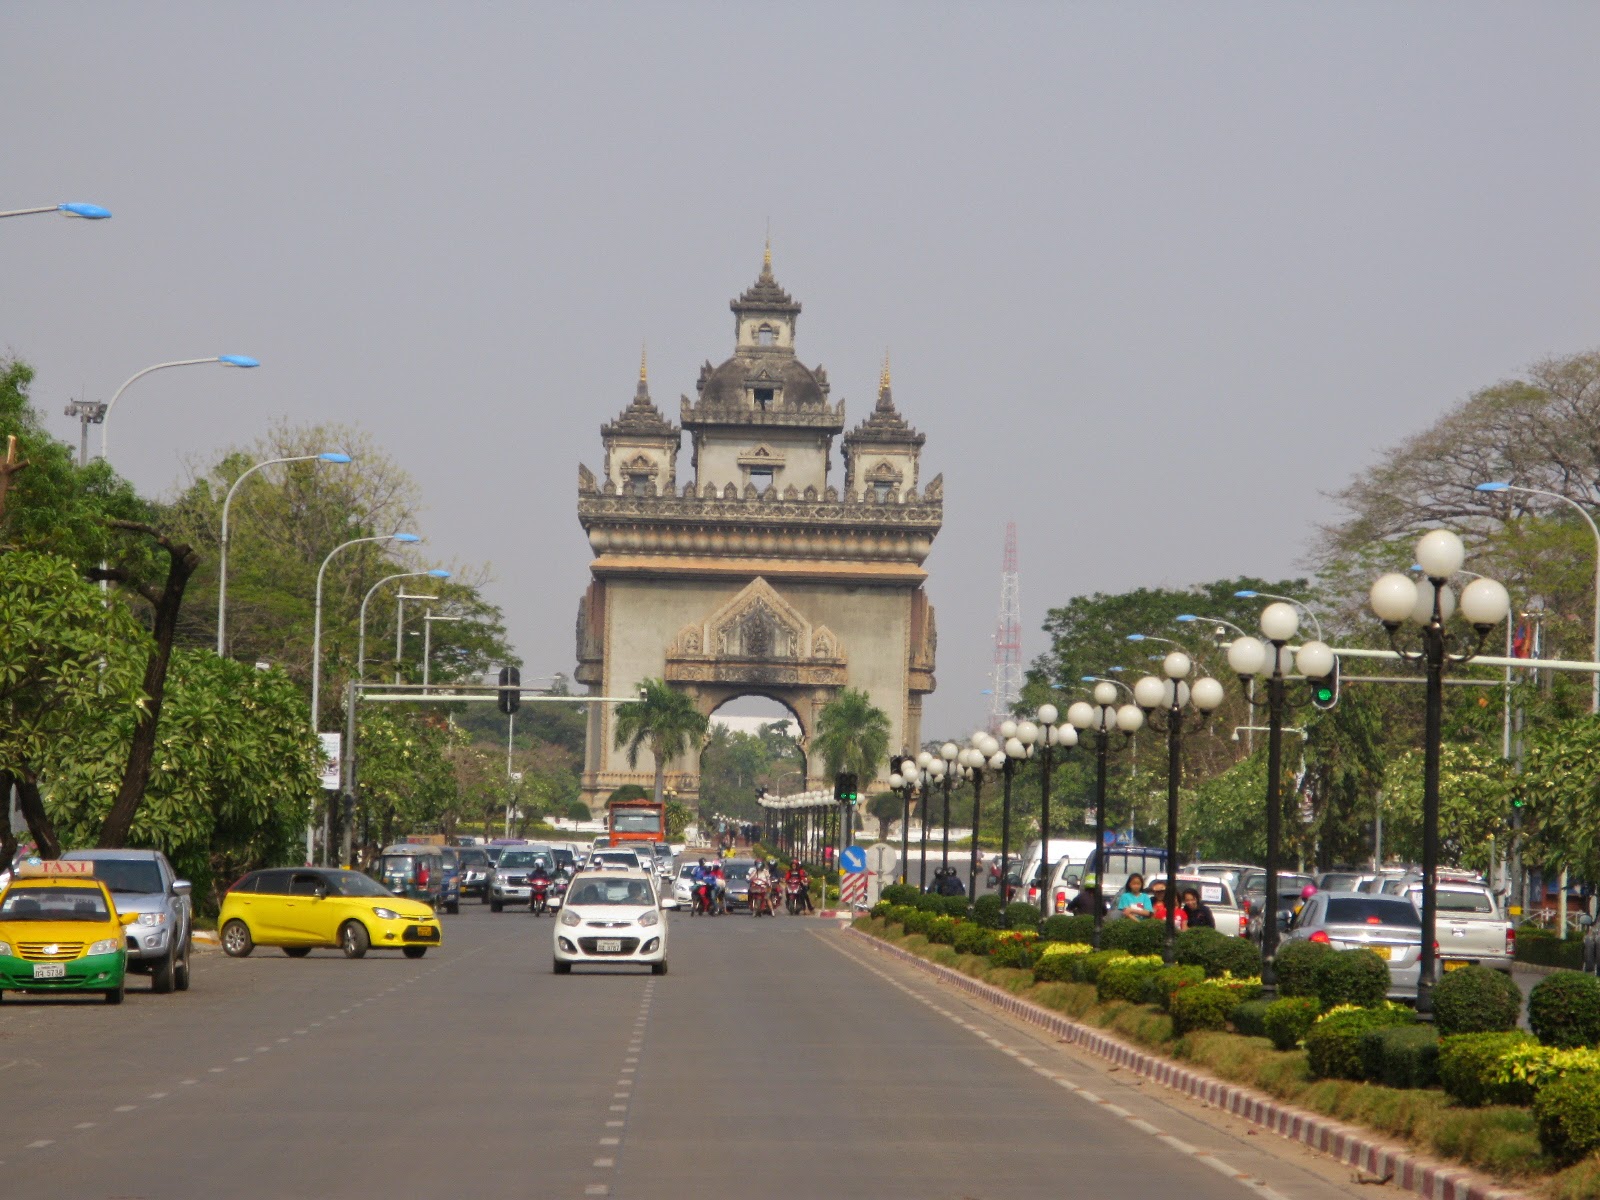 Vientiane's answer to the Arc du Triomphe (it's taller)